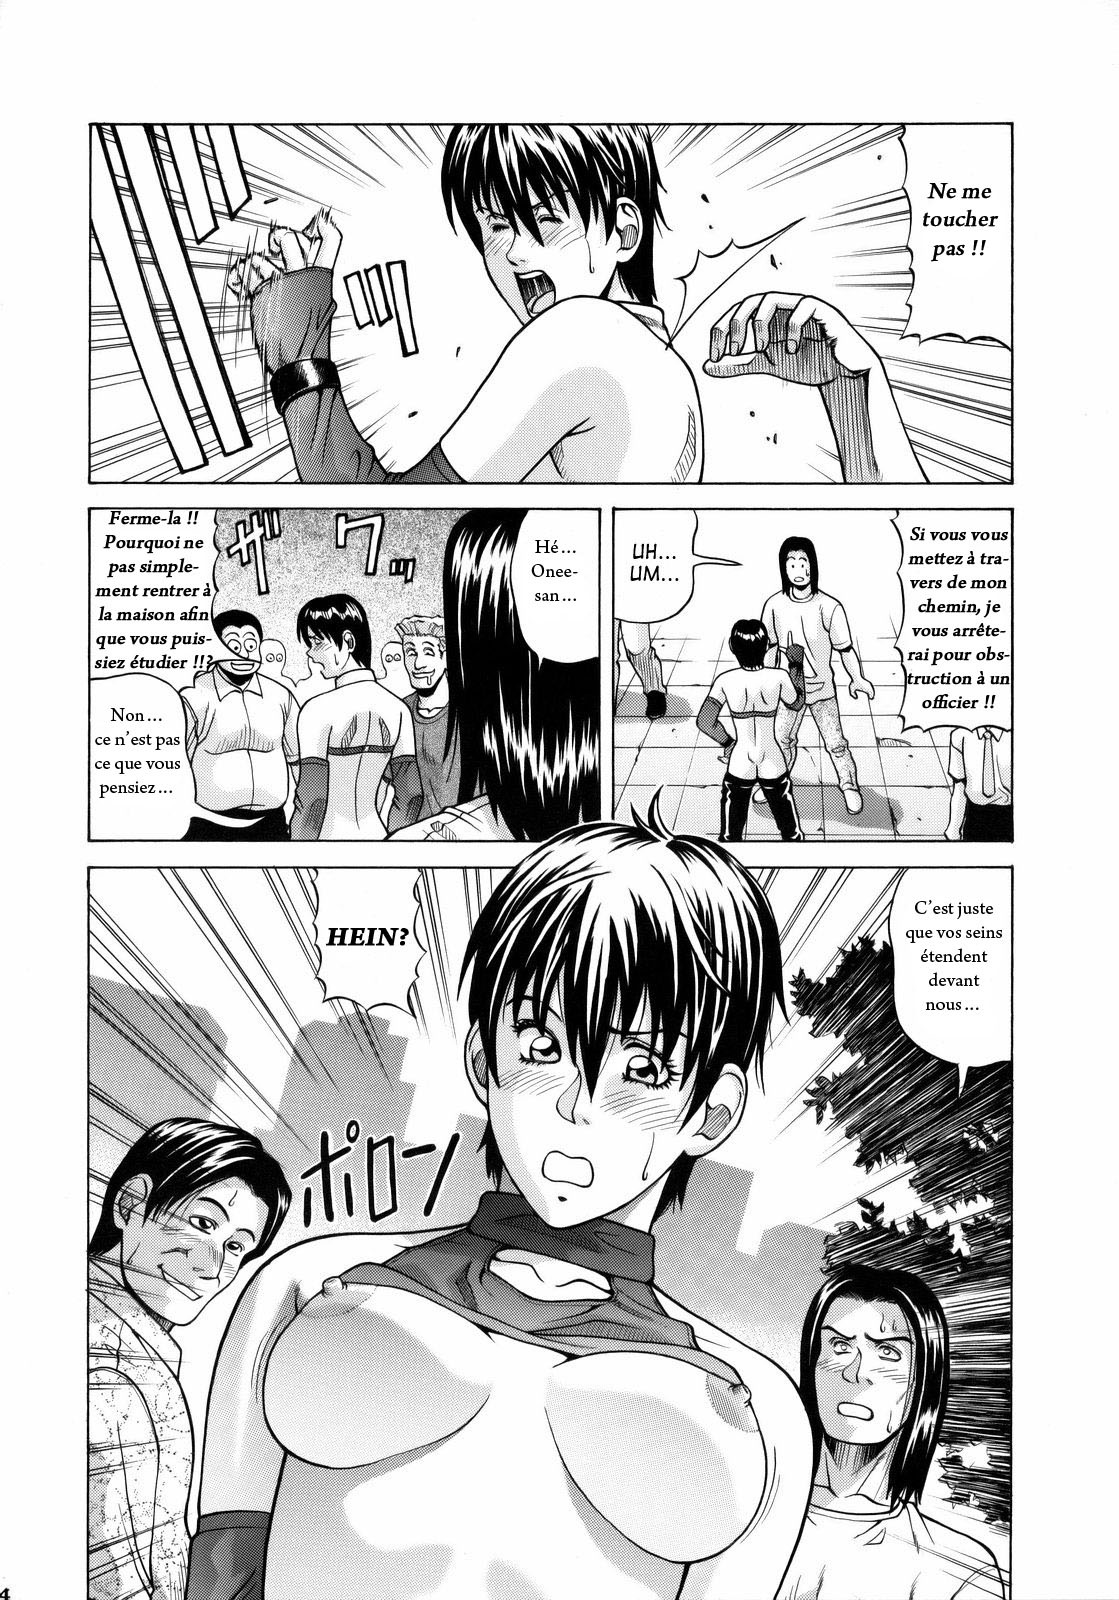 (C75) [Human High-Light Film (Jacky Knee-san)] Rebecca Chambers (Resident Evil) [French] page 13 full